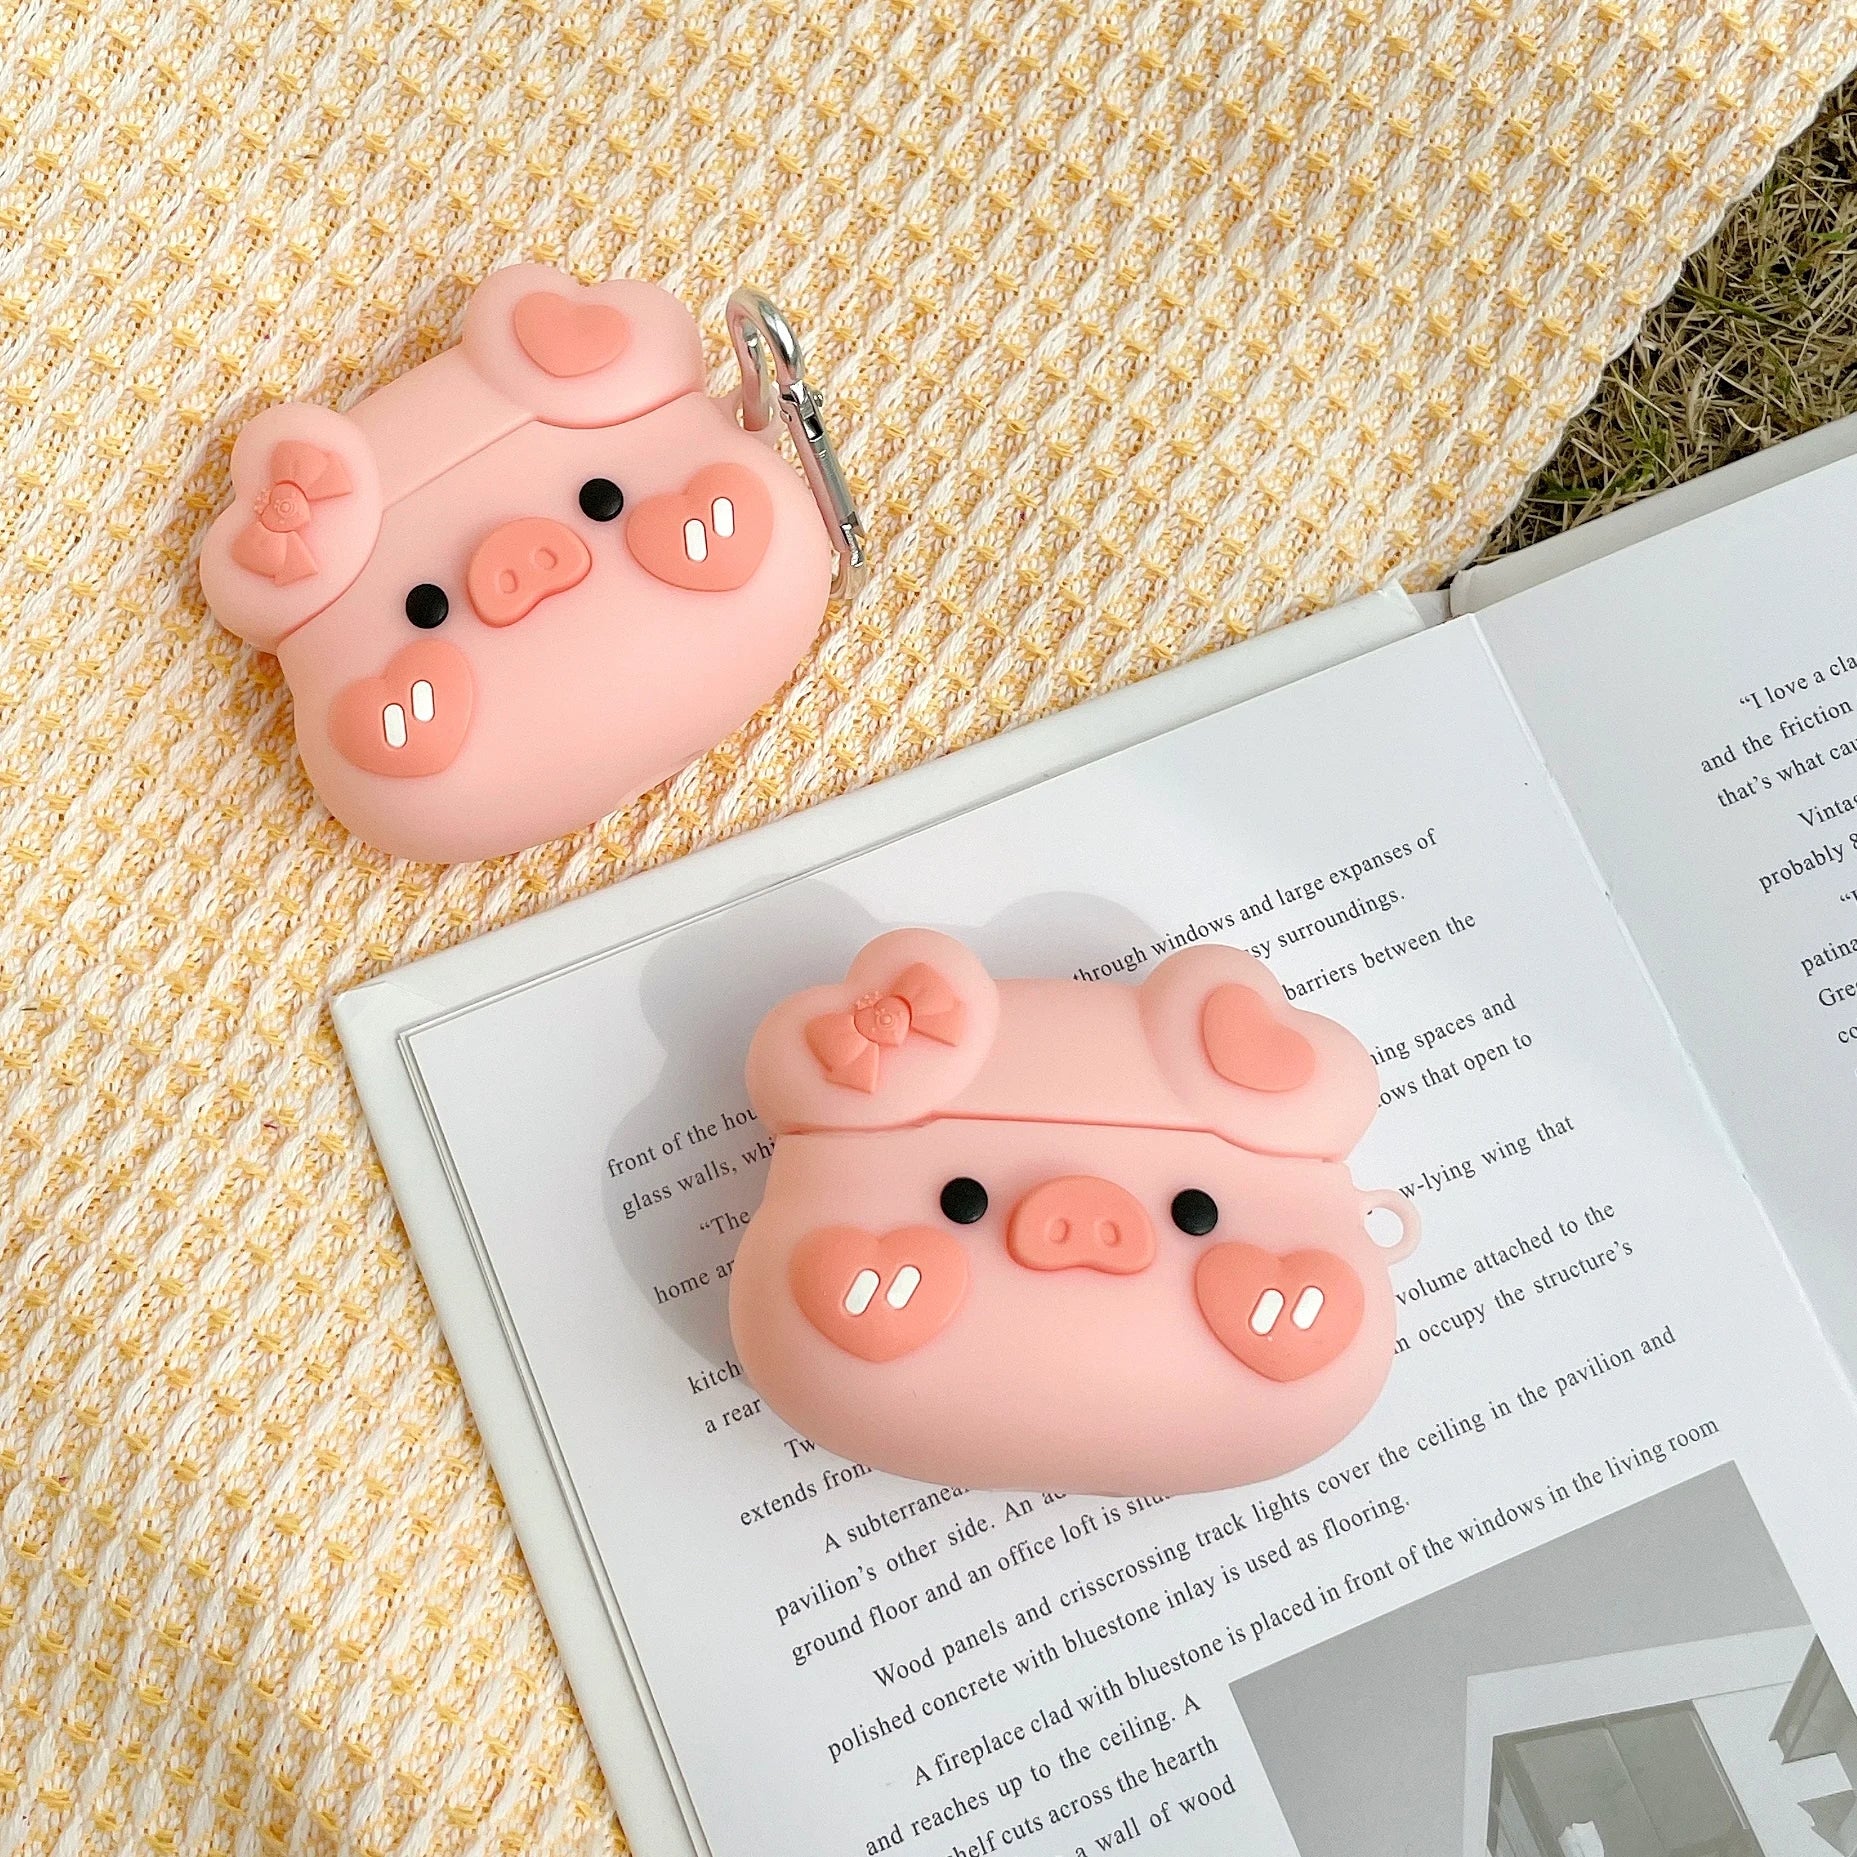 Cute Pig Airpods Cover for Apple AirPods Pro - Premium Silicone Case (Limited Edition)